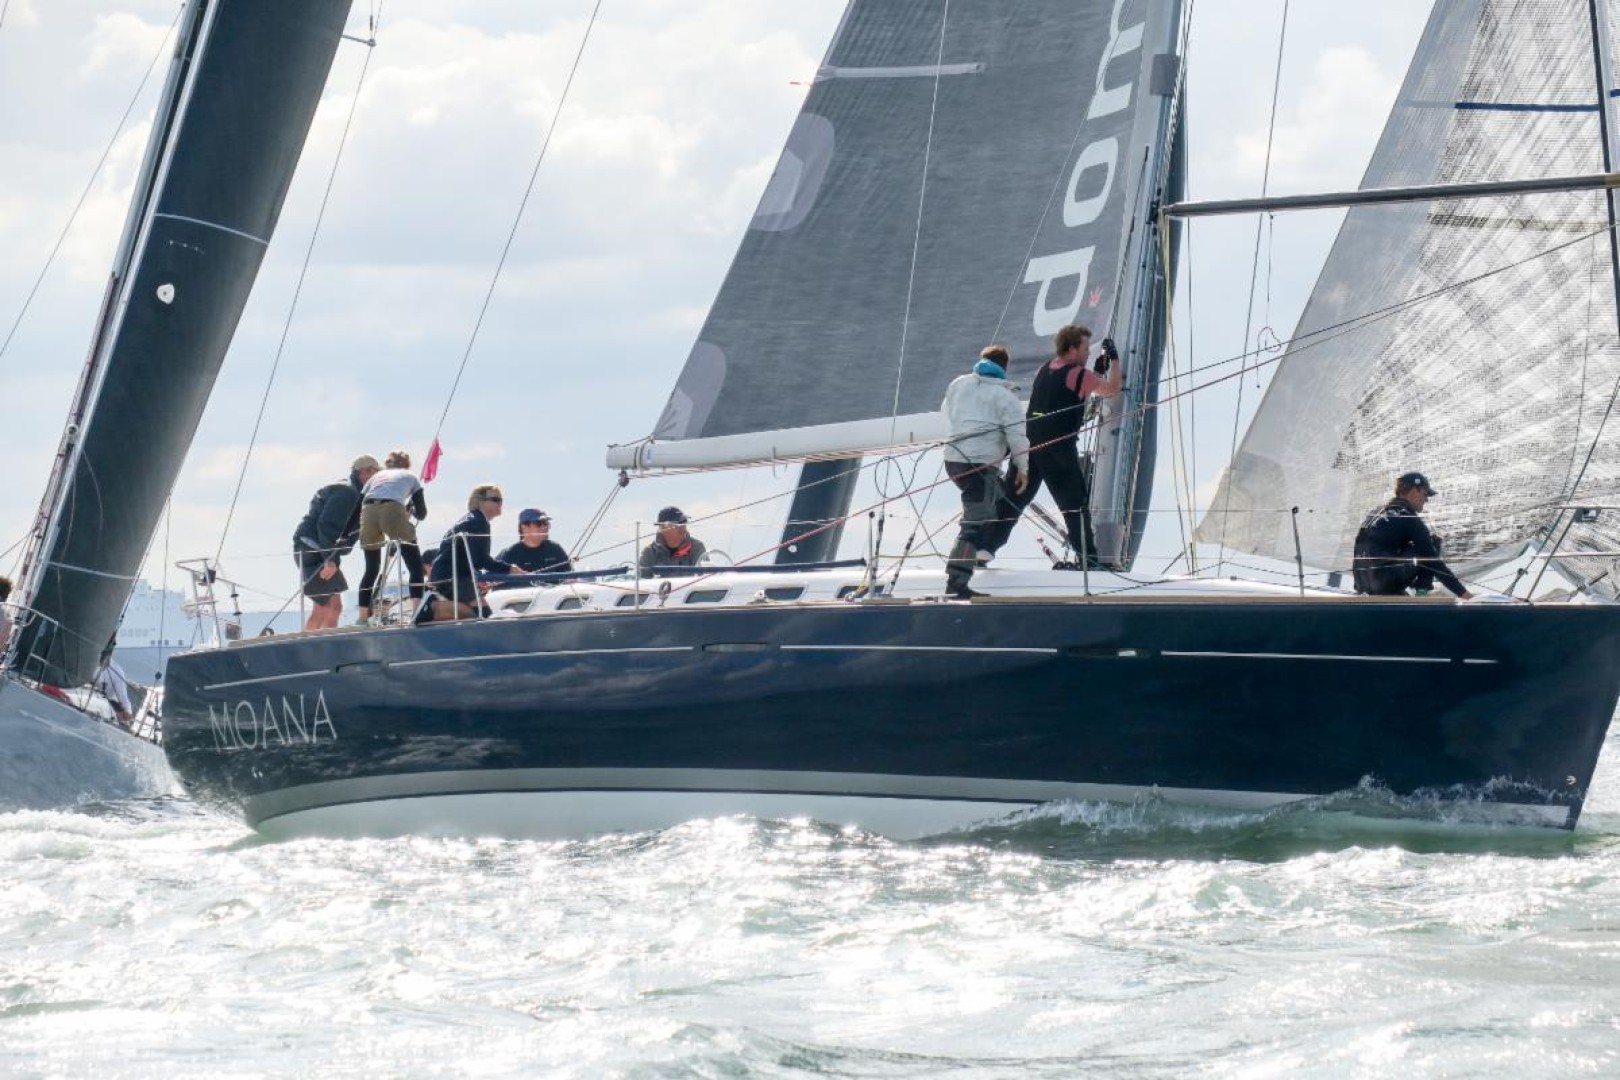 Belgium rules the waves: IRC European Champion decided by just 0.003 points